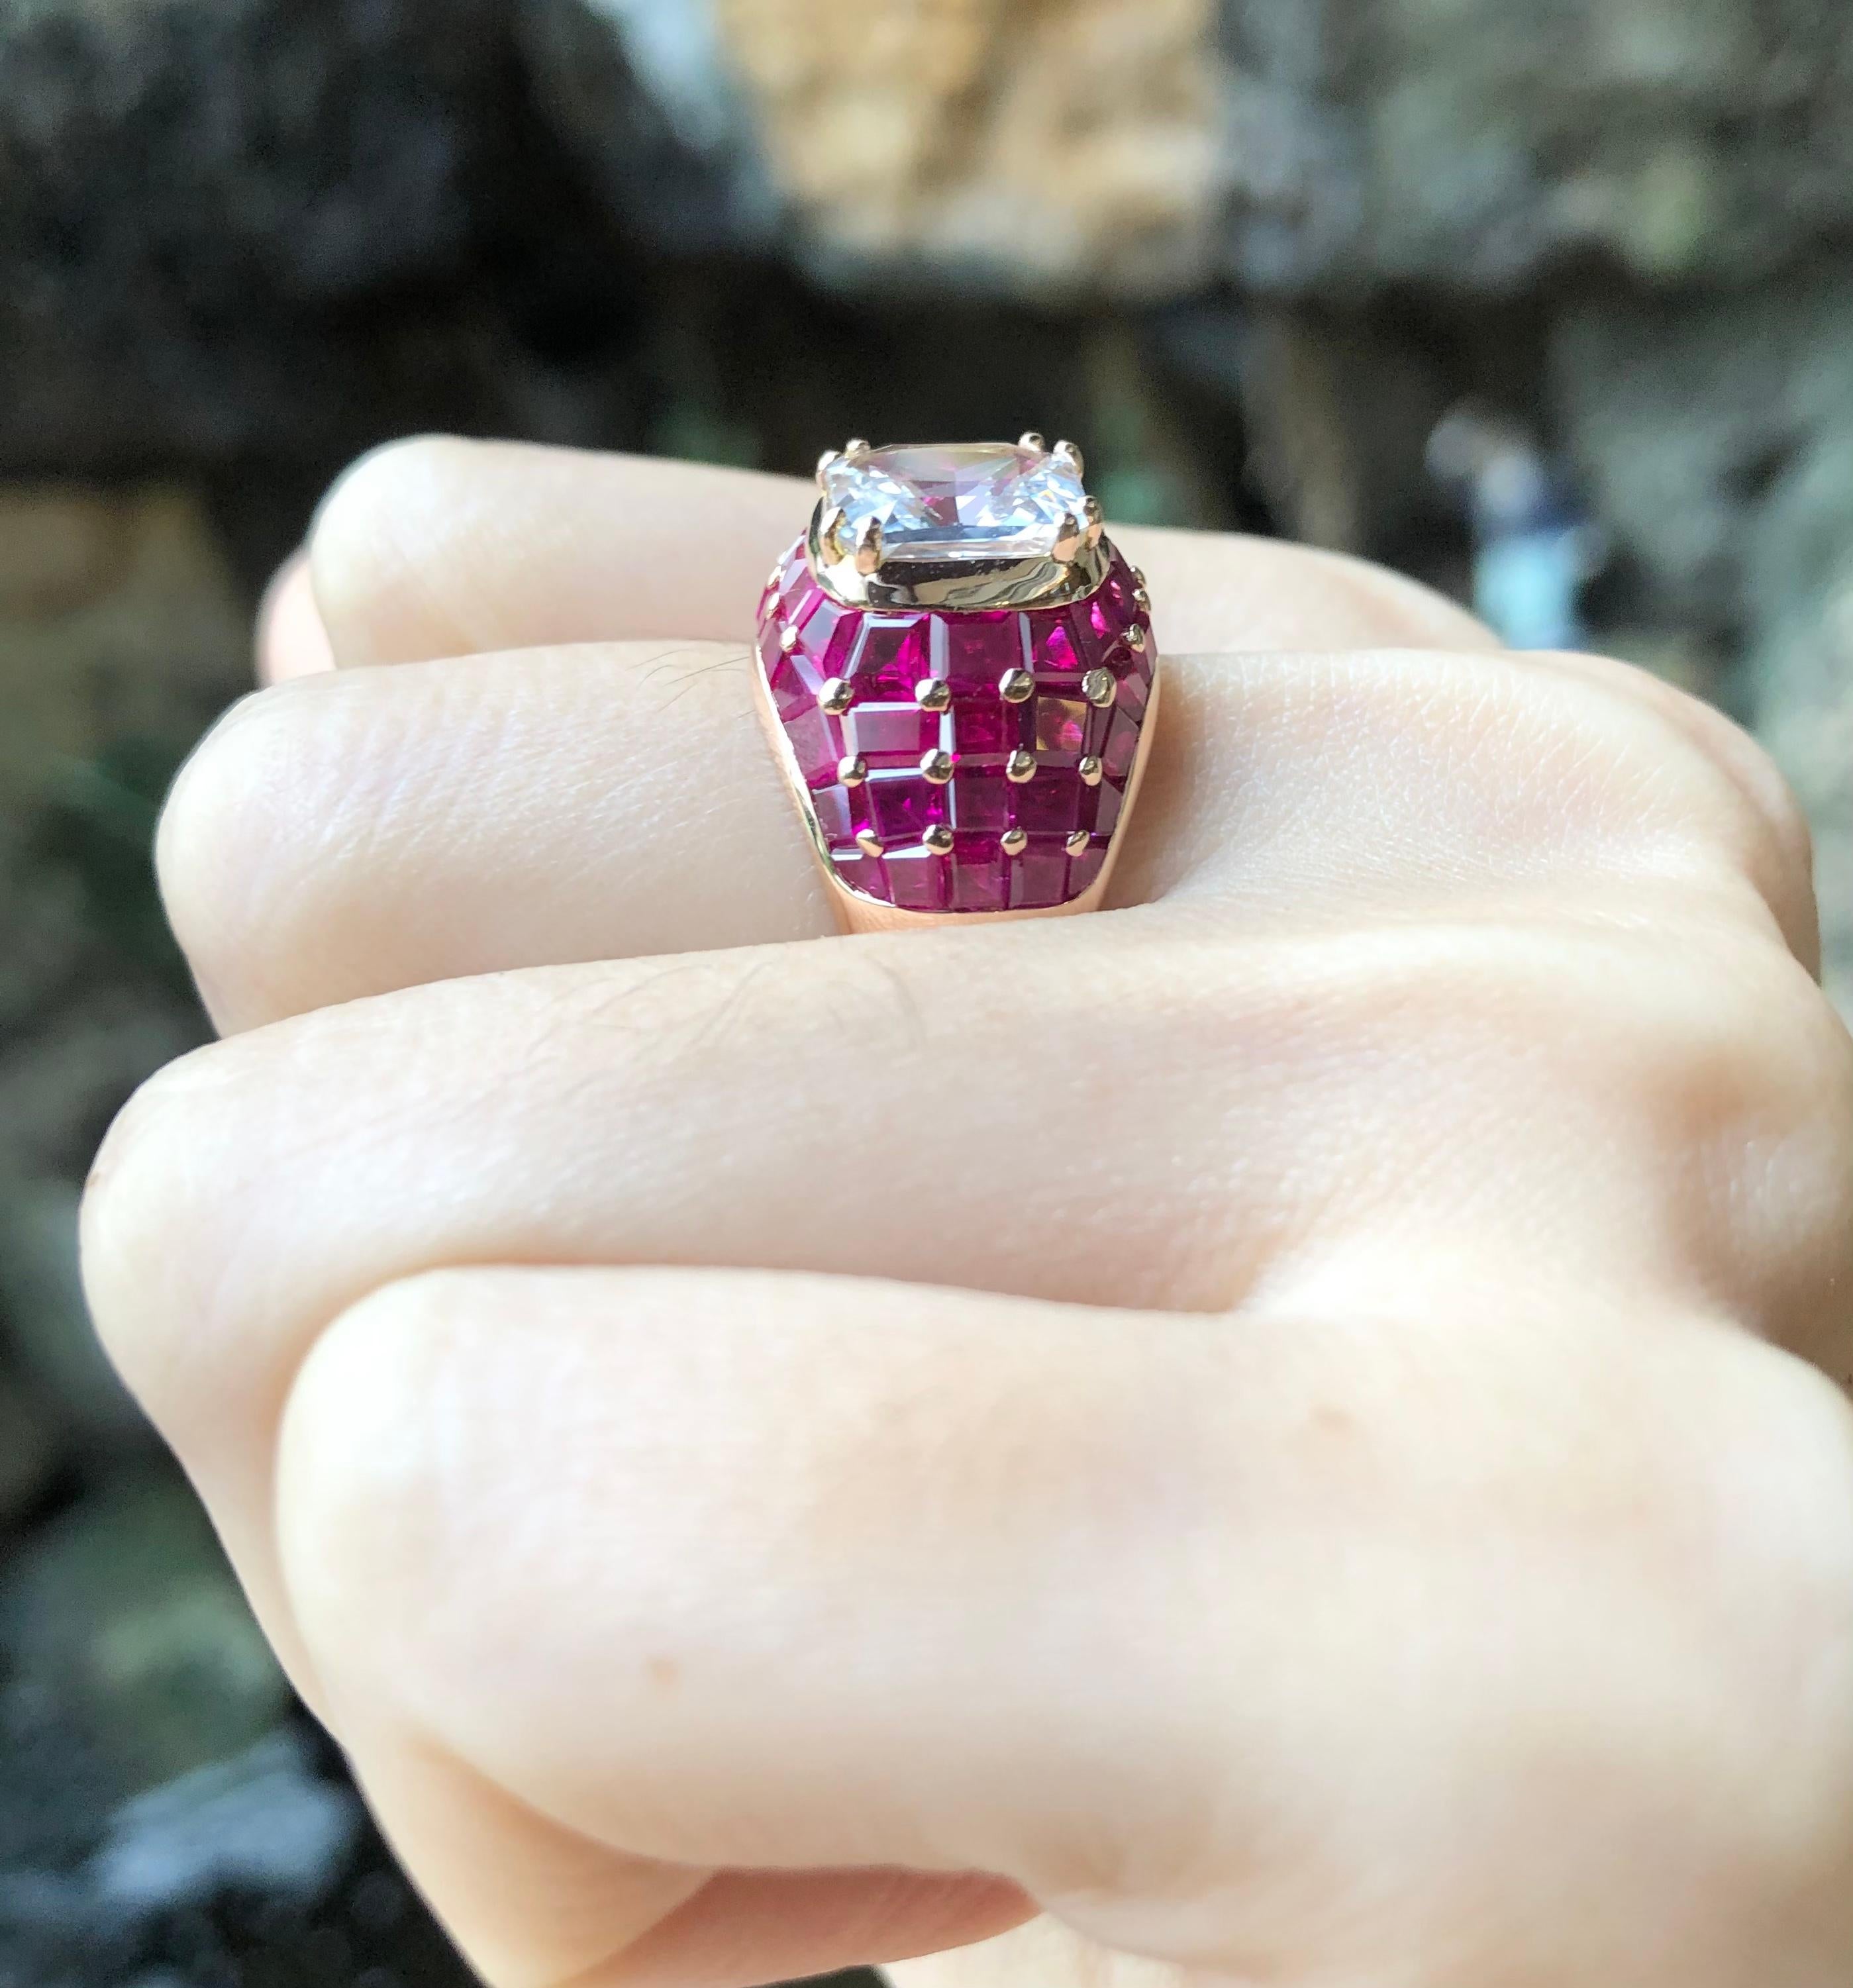 White Sapphire 3.53 carats with Ruby 8.03 carats Ring set 18 Karat Rose Gold Settings

Width:  1.1 cm 
Length: 1.5 cm
Ring Size: 53
Total Weight: 11.27 grams

